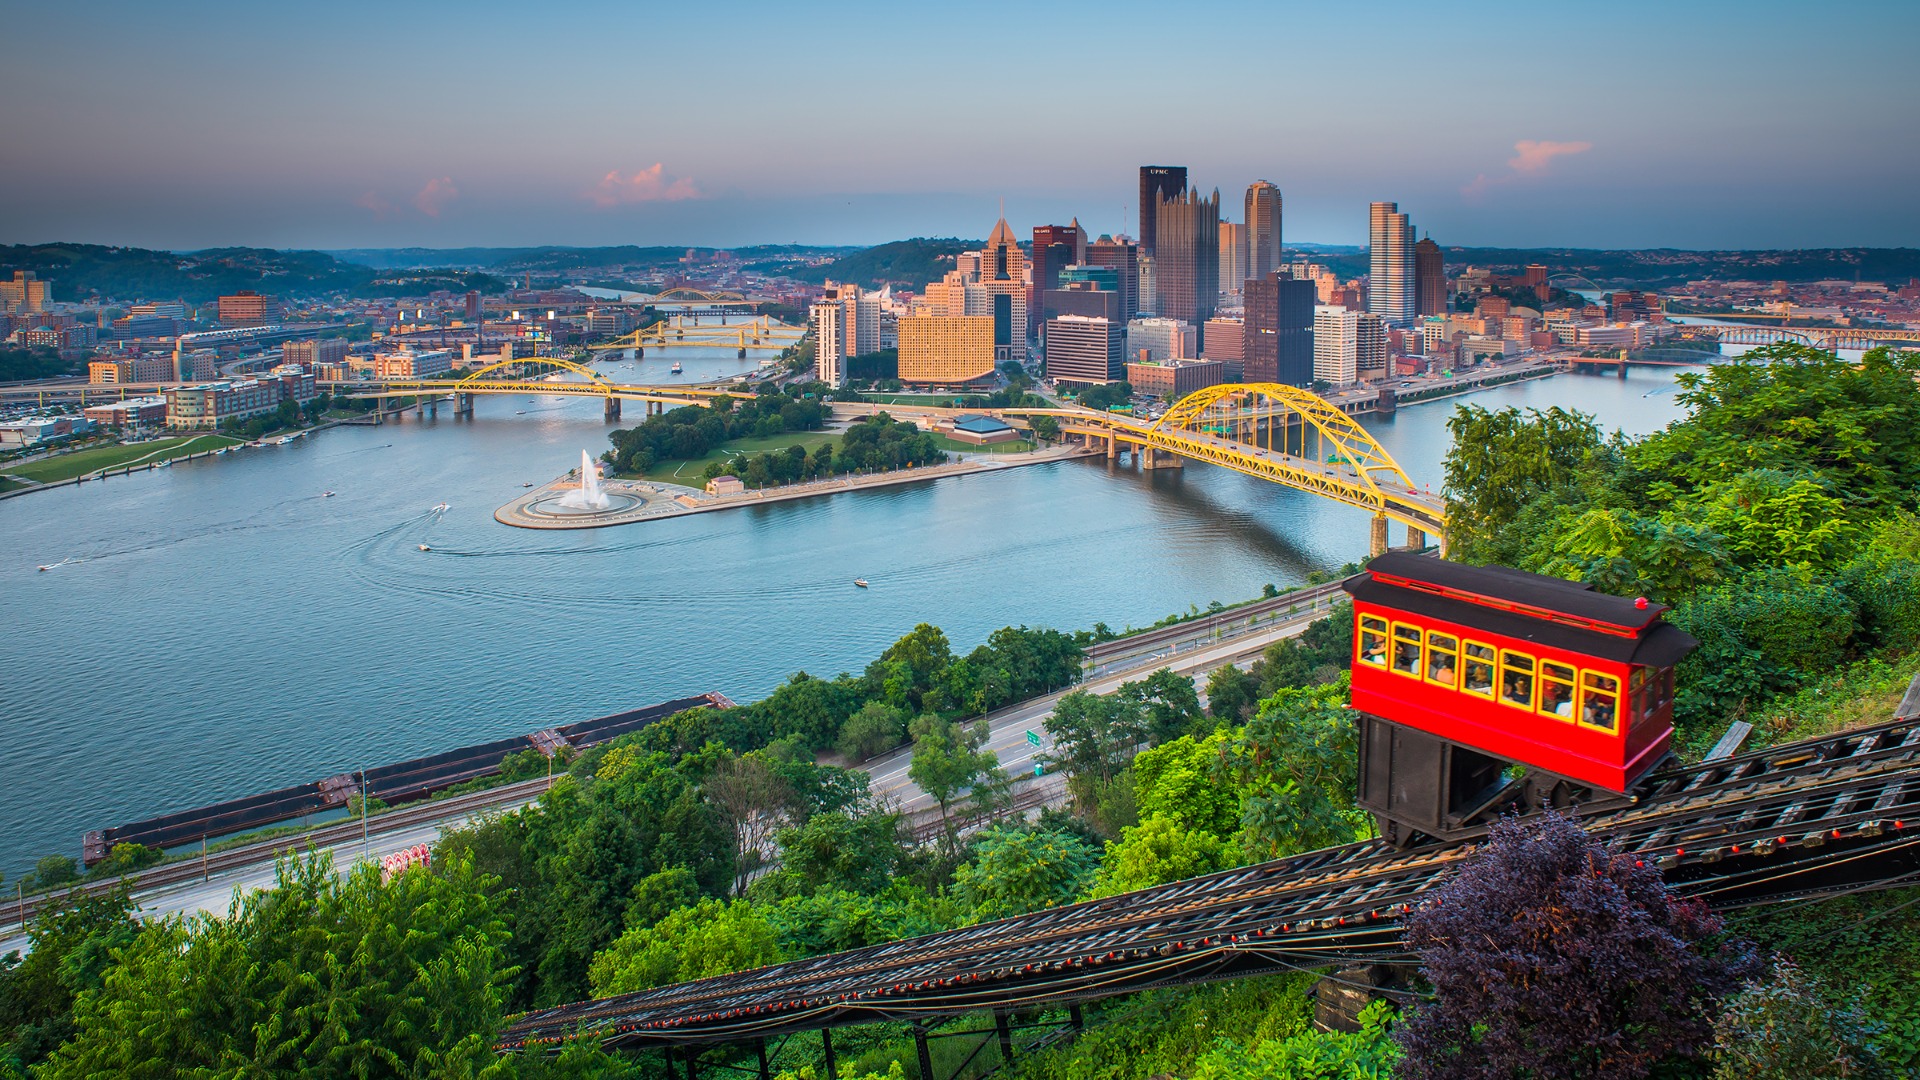 New Homes for Sale in Pittsburgh, PA, Home Builders in Pittsburgh